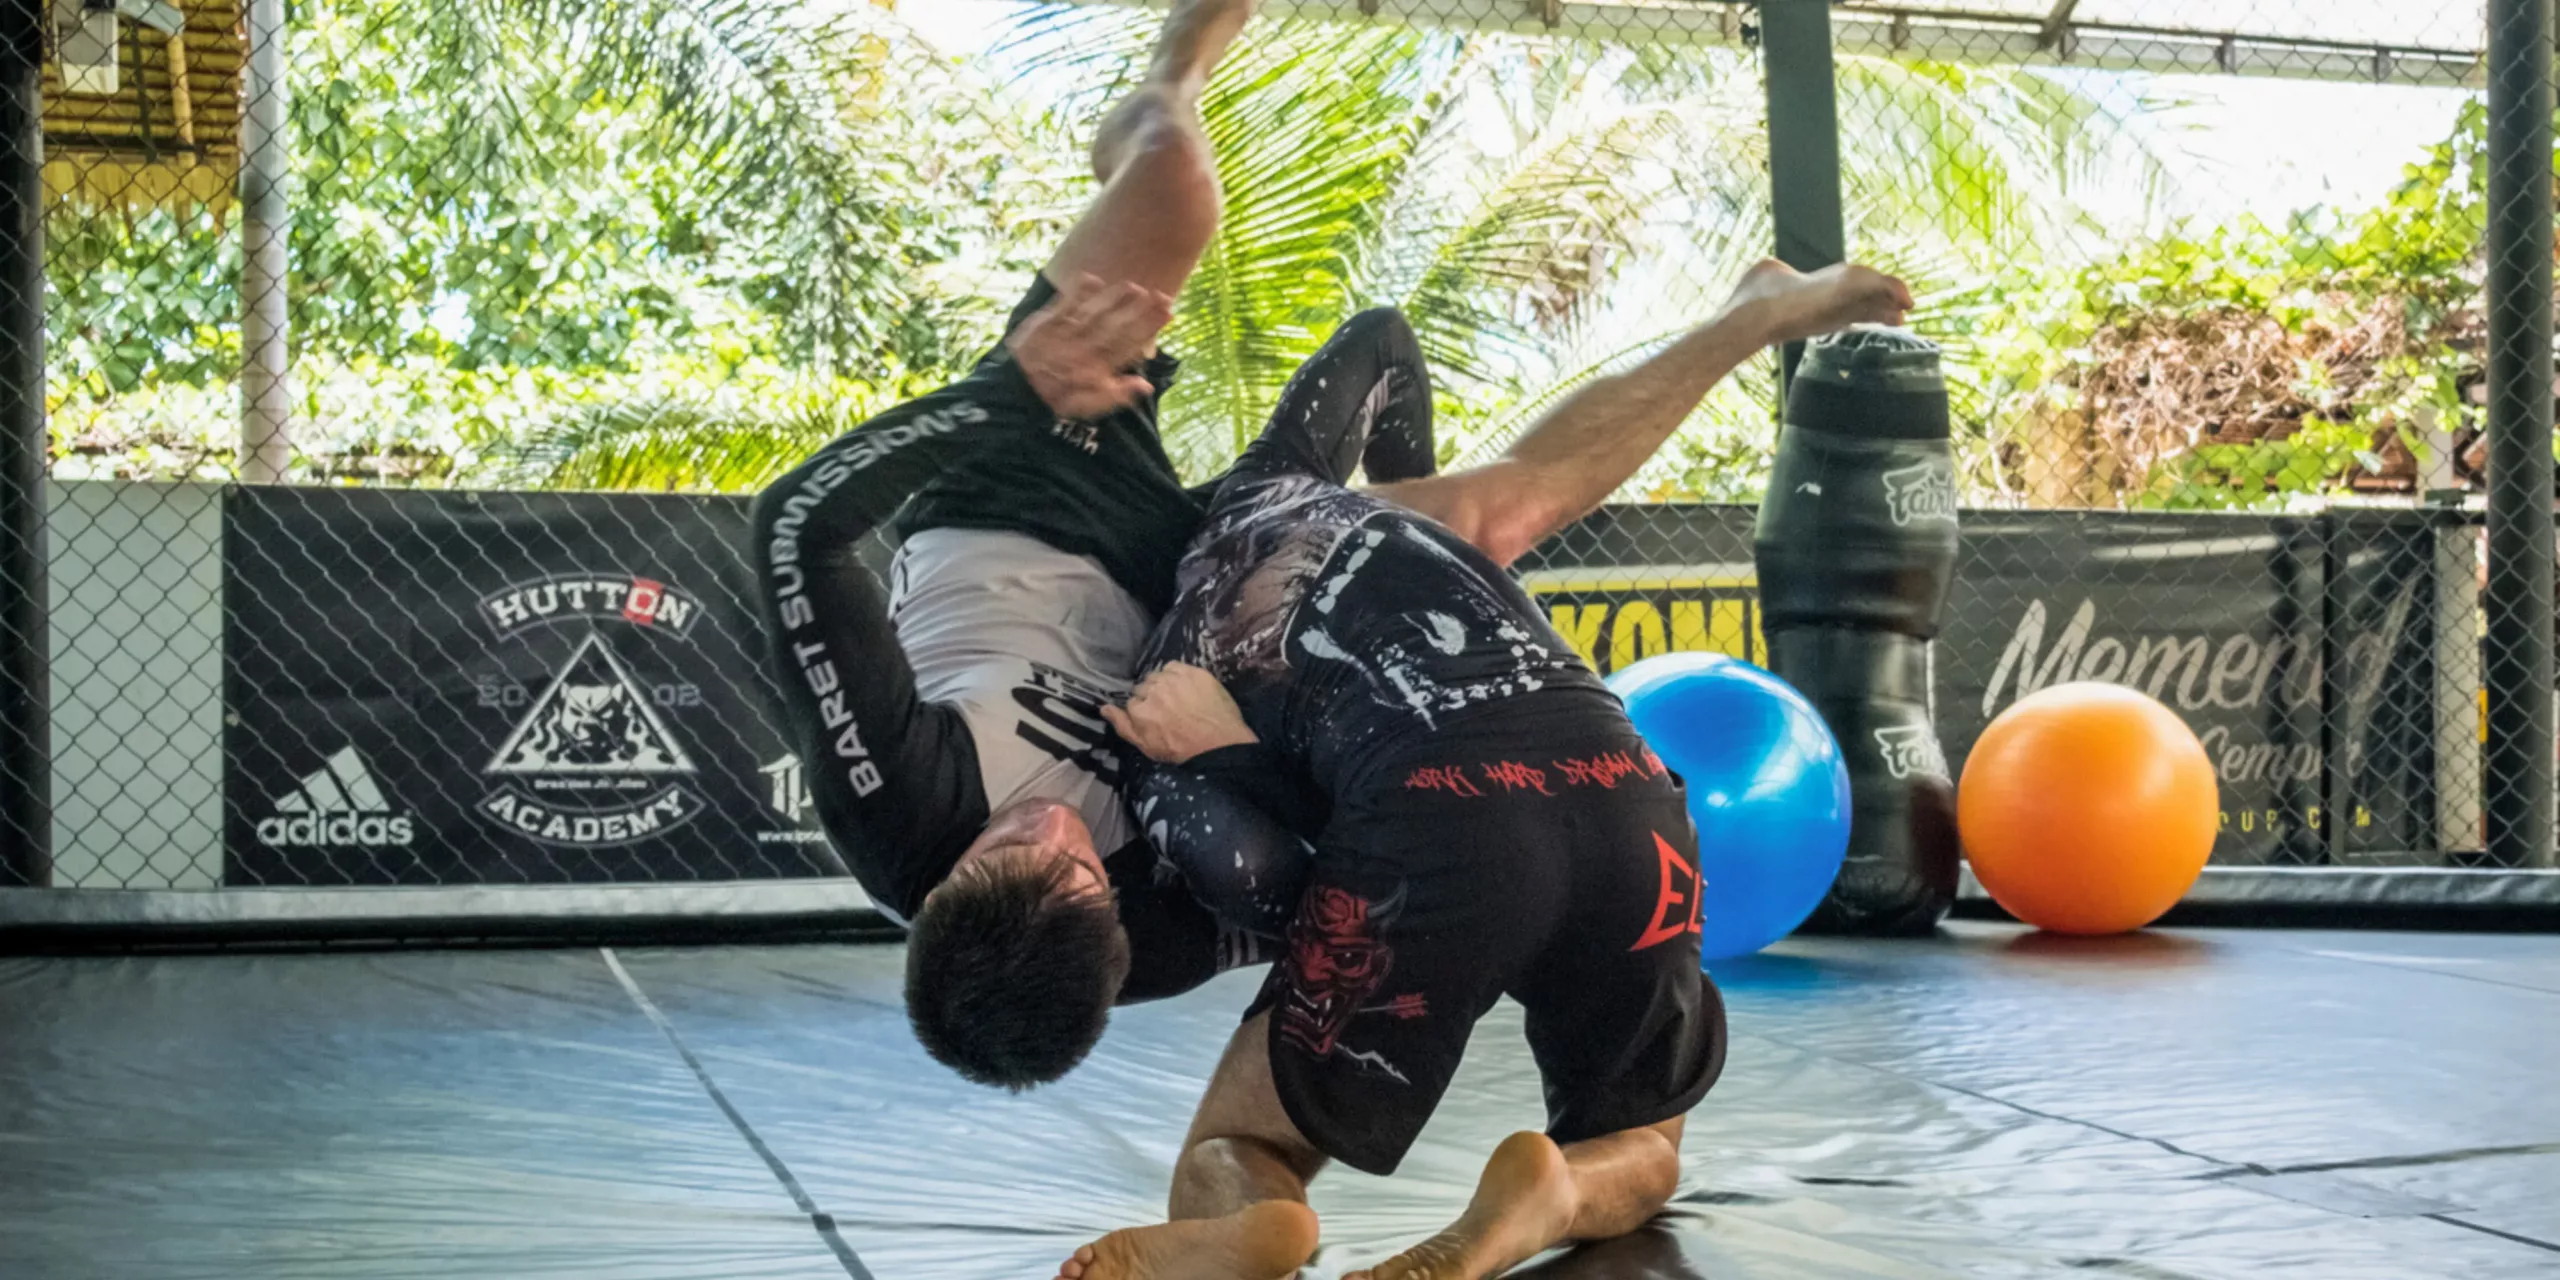 An action-packed moment in a Brazilian Jiu-Jitsu class, where a student in black athletic wear attempts a dynamic guard pass with a flip over his partner, who is on the mat trying to maintain guard.